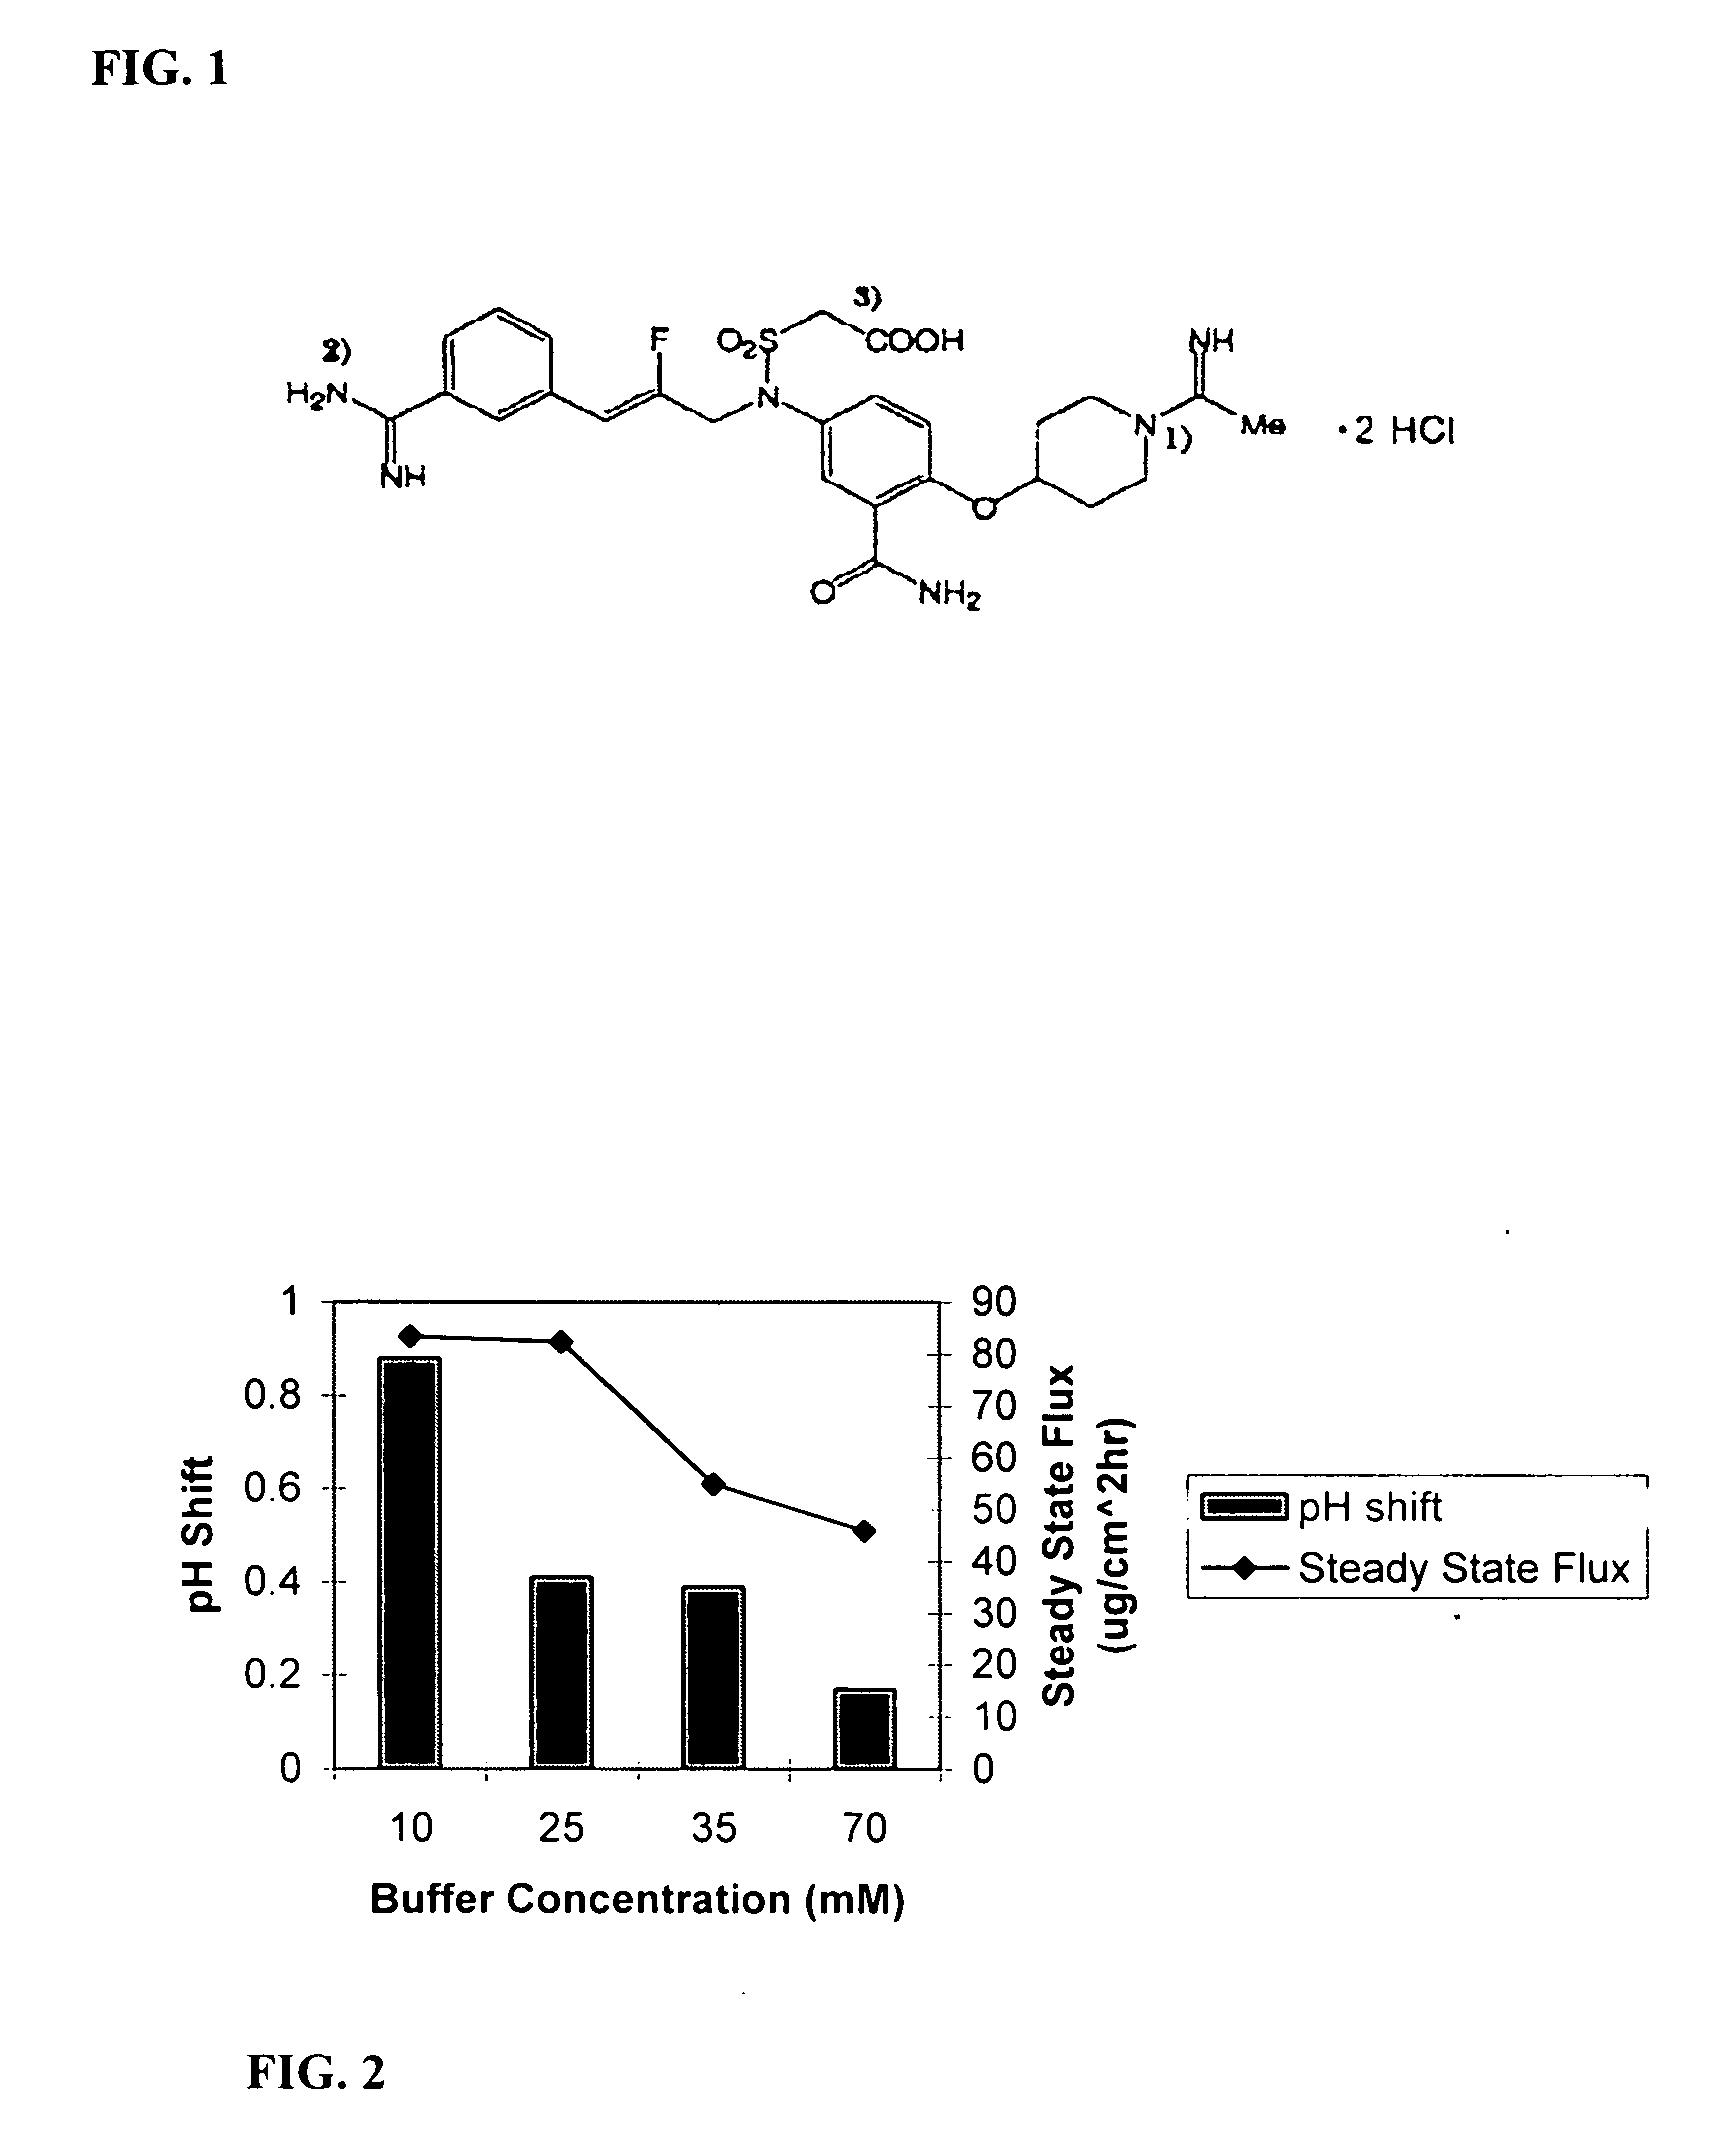 Peptidically buffered formulations for electrotransport applications and methods of making